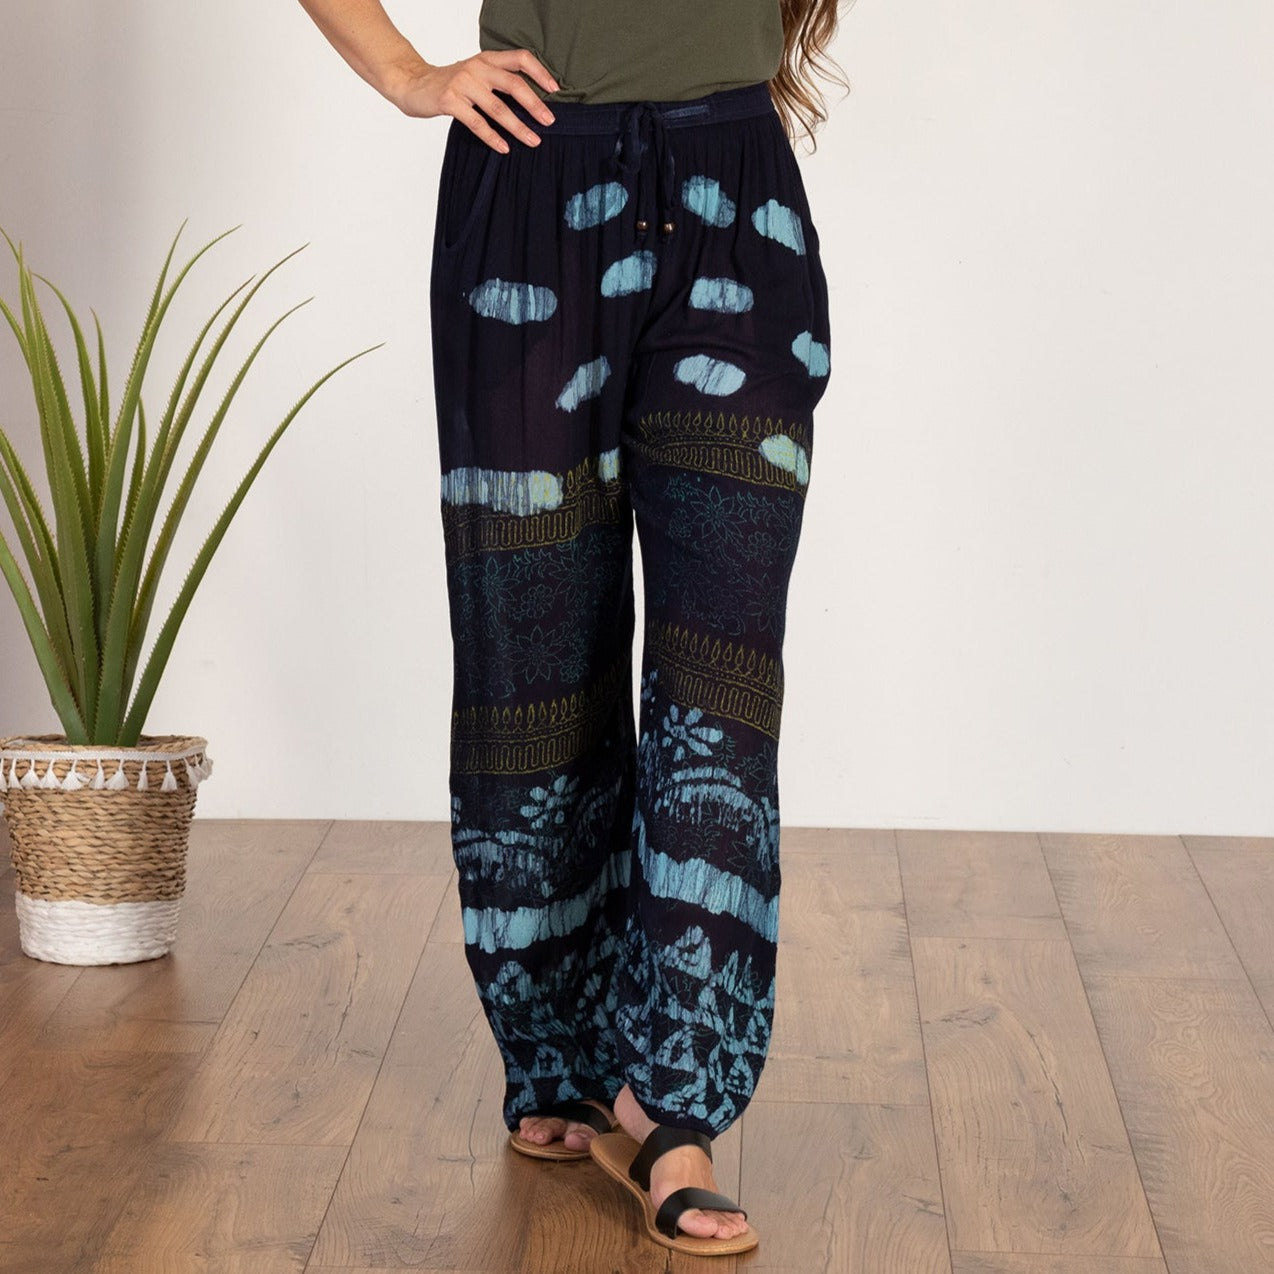 Women's Made To Move Casual Palazzo Pants & Top Set - Pants - Black & Blue - 3X